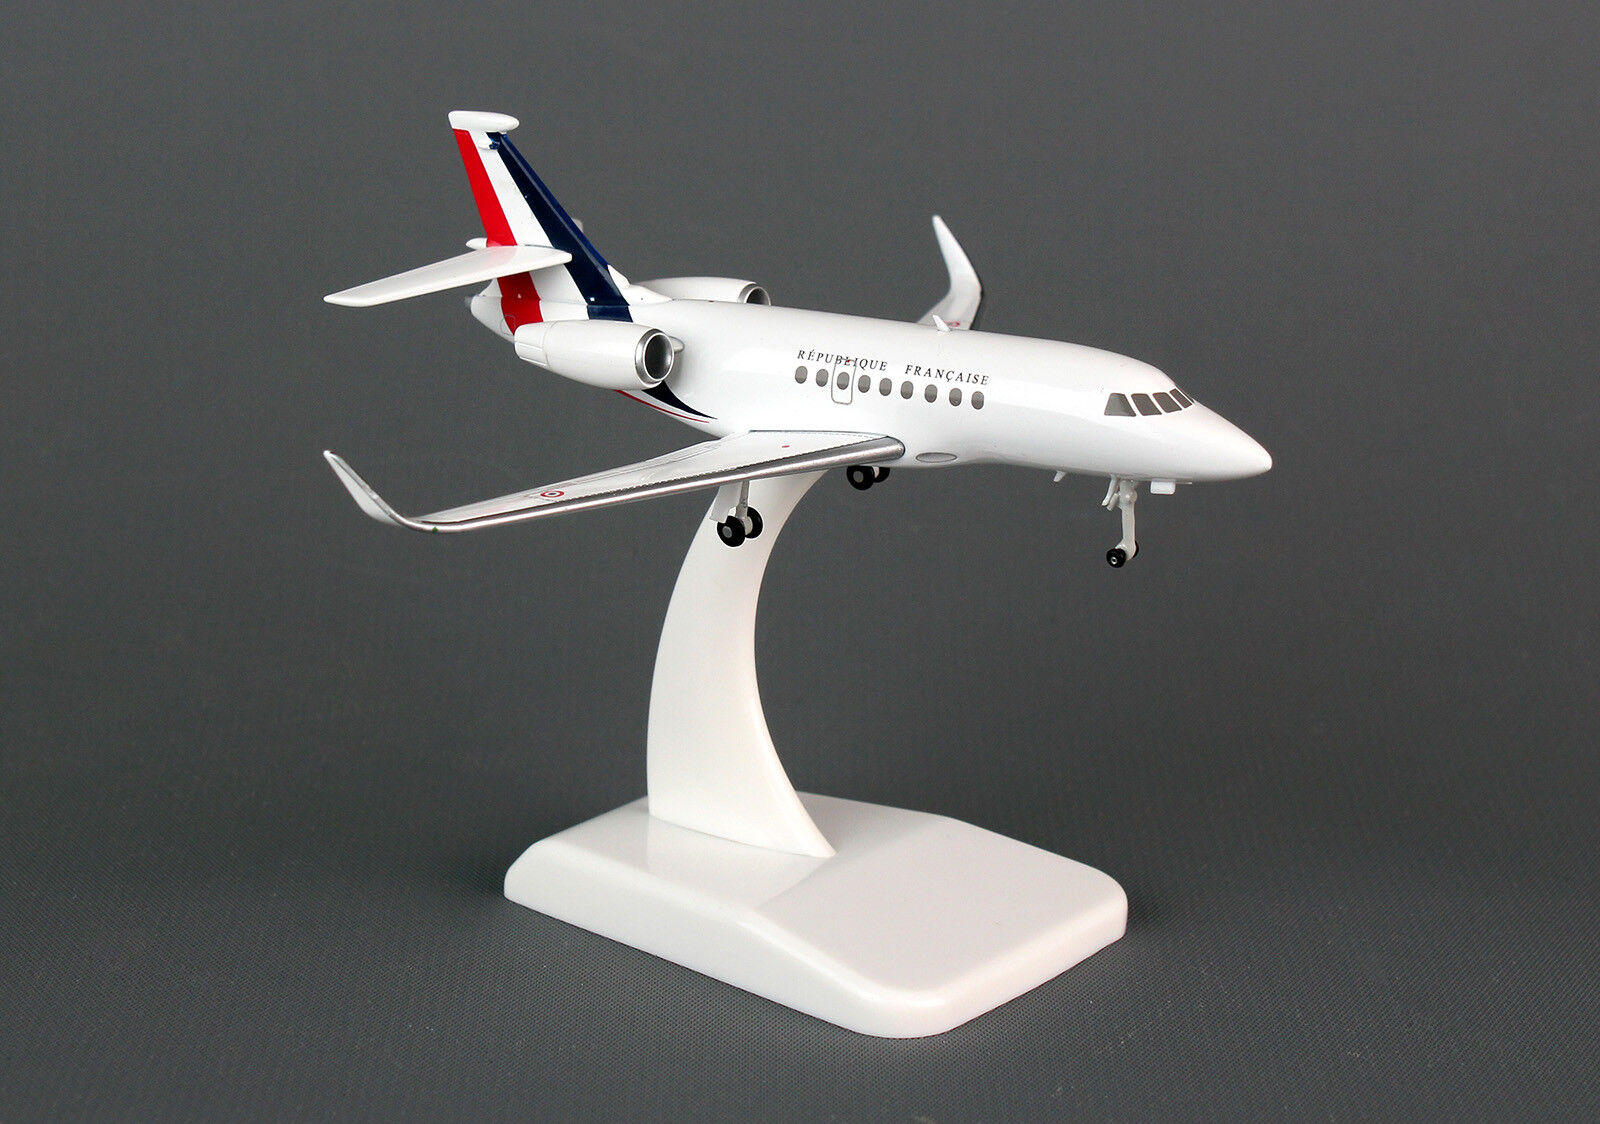 Hogan Wings French Air Force Dassault Falcon 2000 HG5842 1/200 Diecast. New